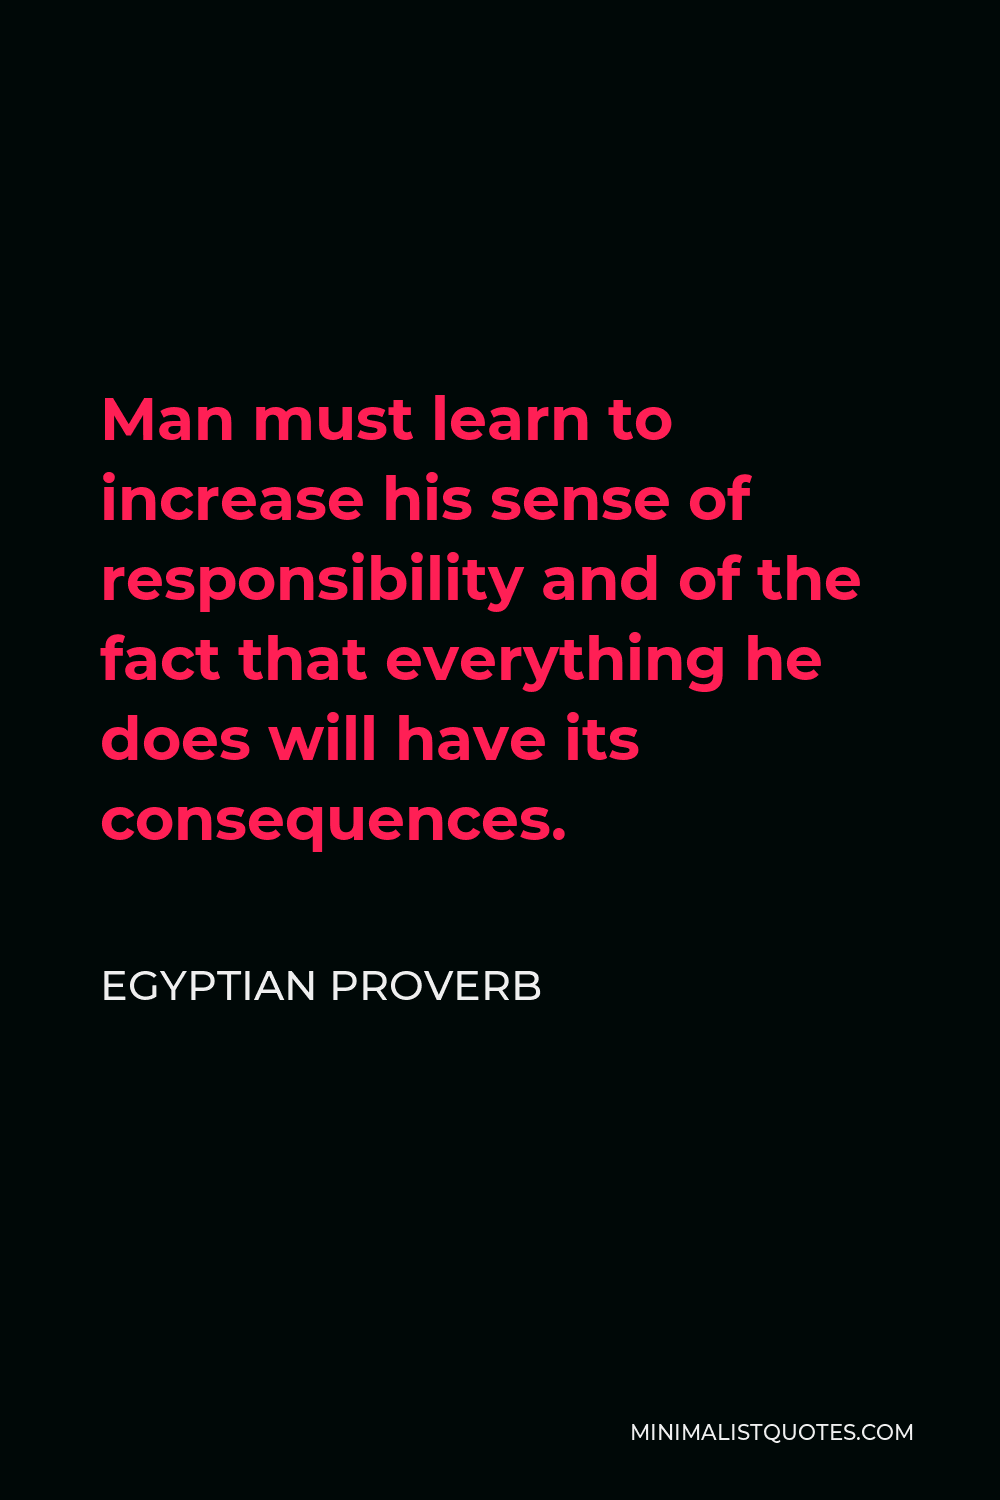 Egyptian Proverb Quote - Man must learn to increase his sense of responsibility and of the fact that everything he does will have its consequences.